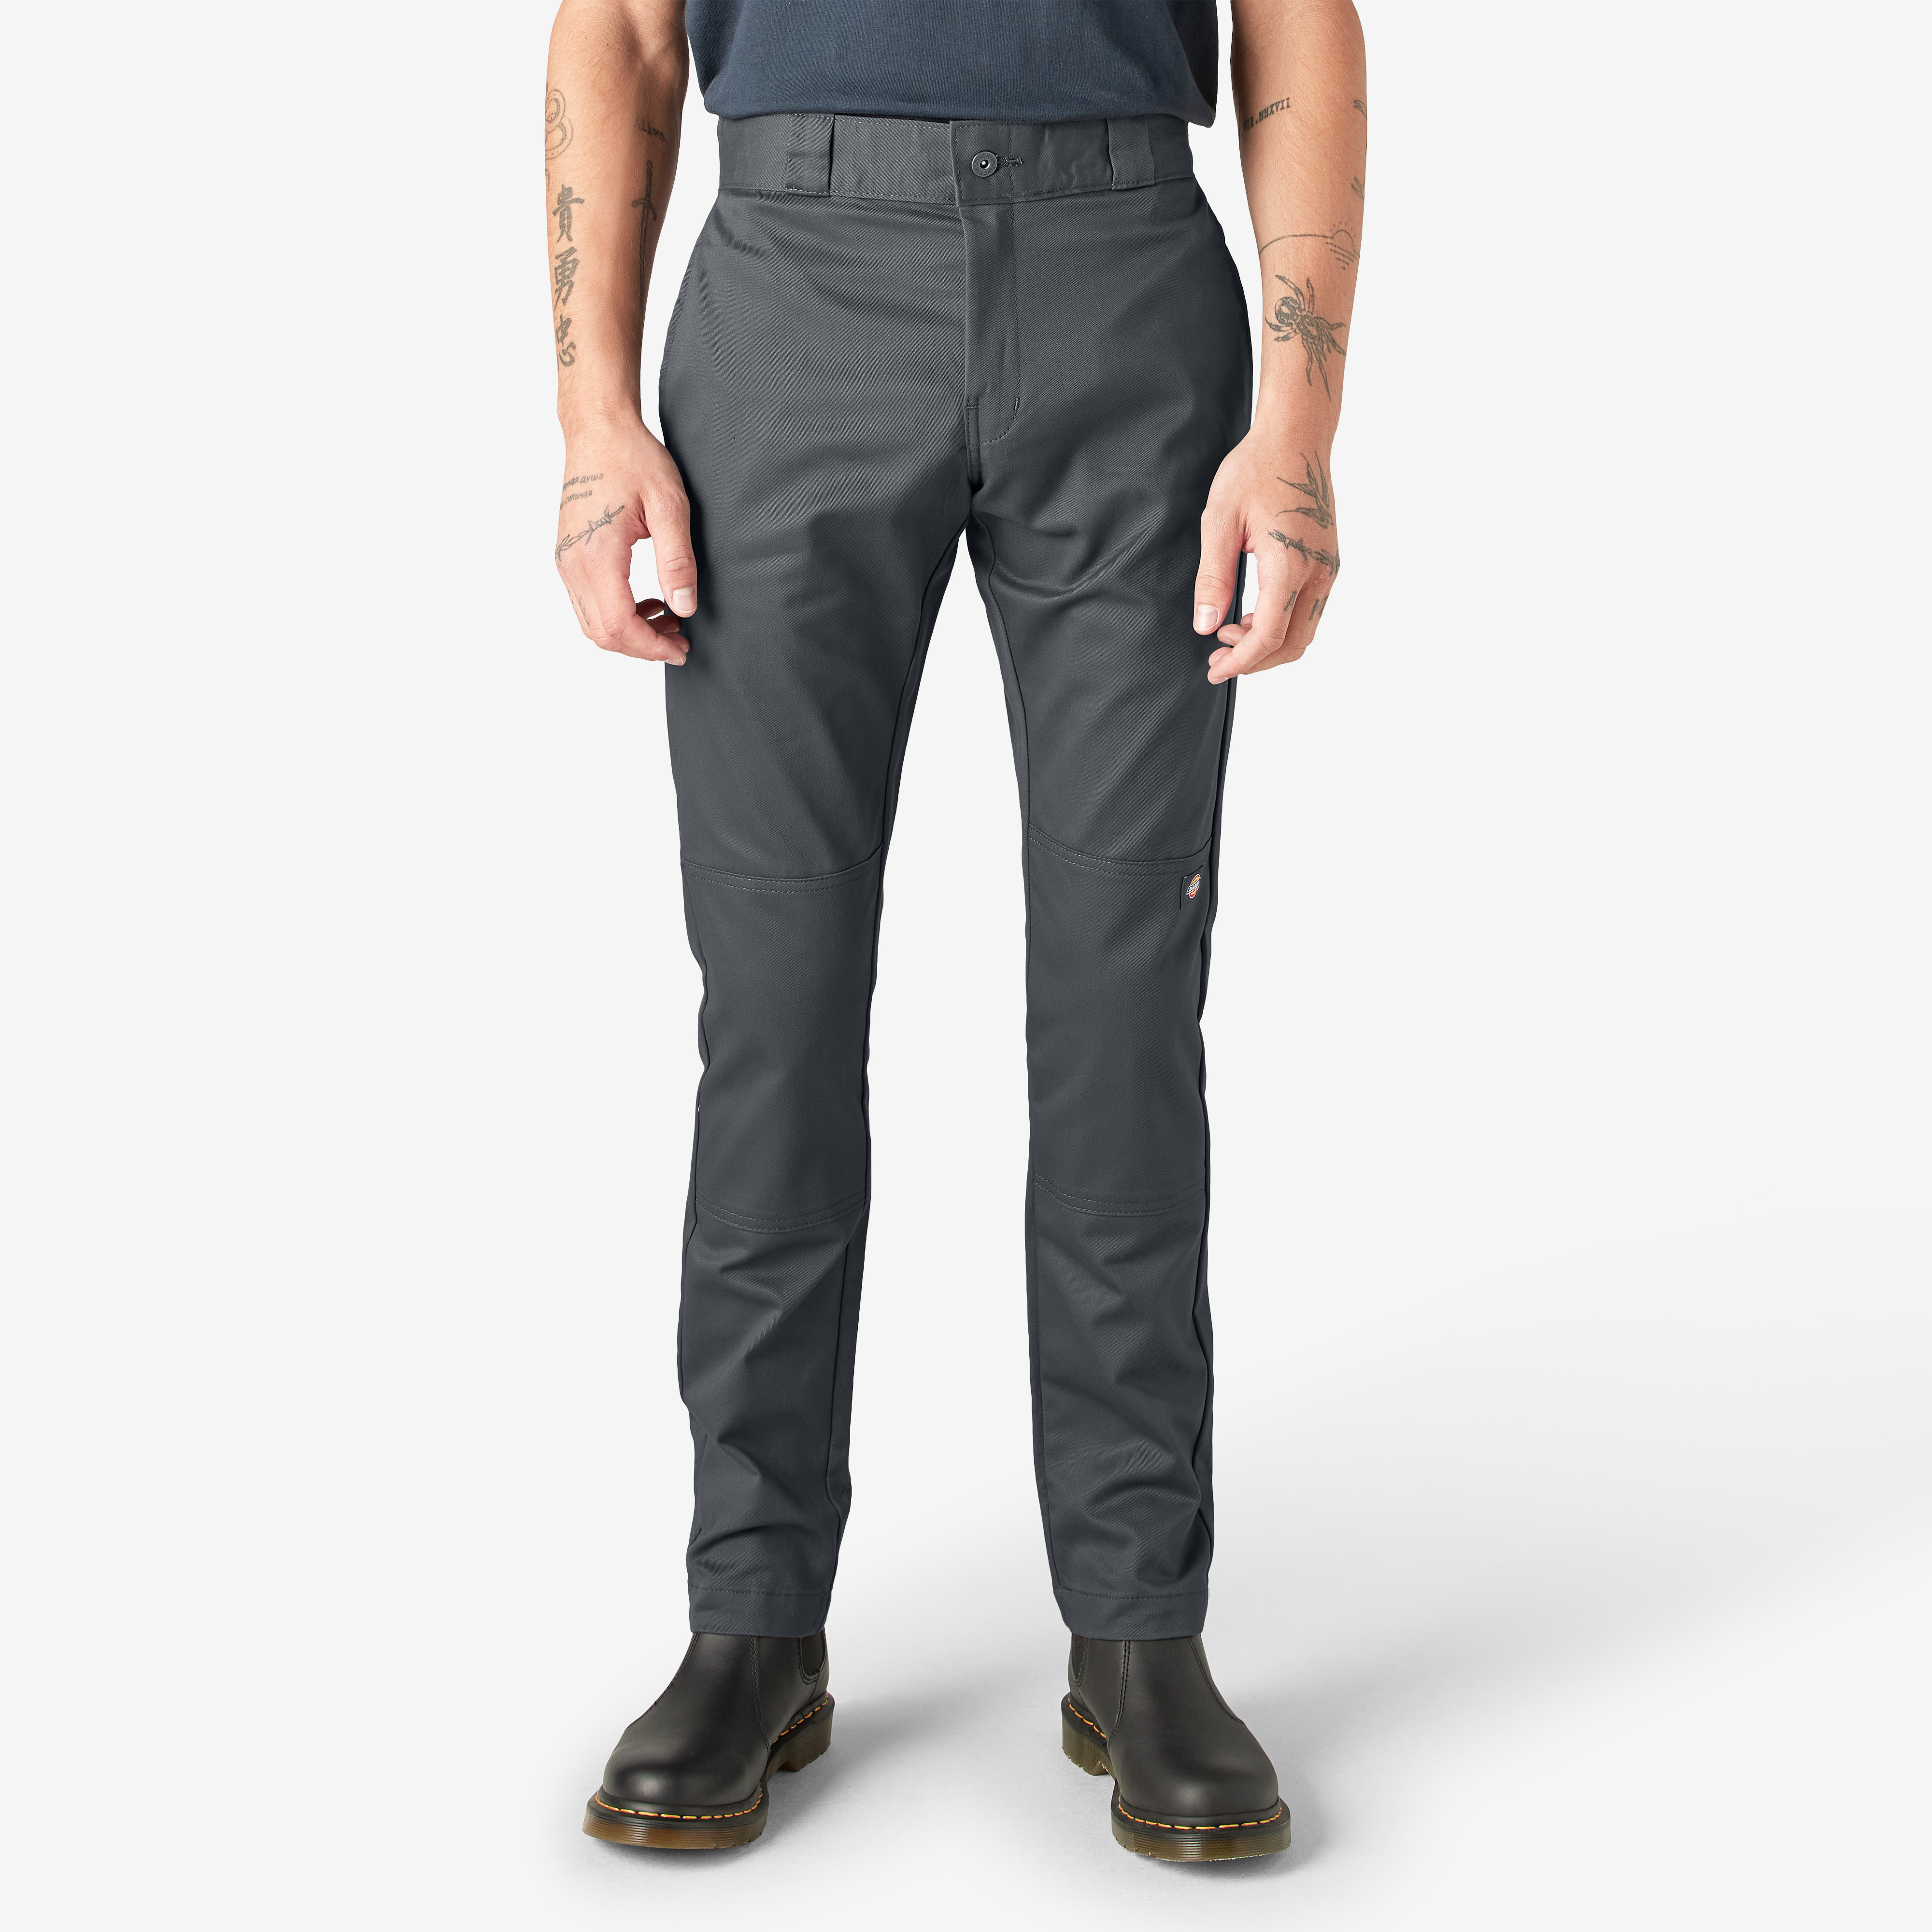 FLEX Skinny Fit Straight Leg Double Knee Work Pants - Charcoal Gray (CH)